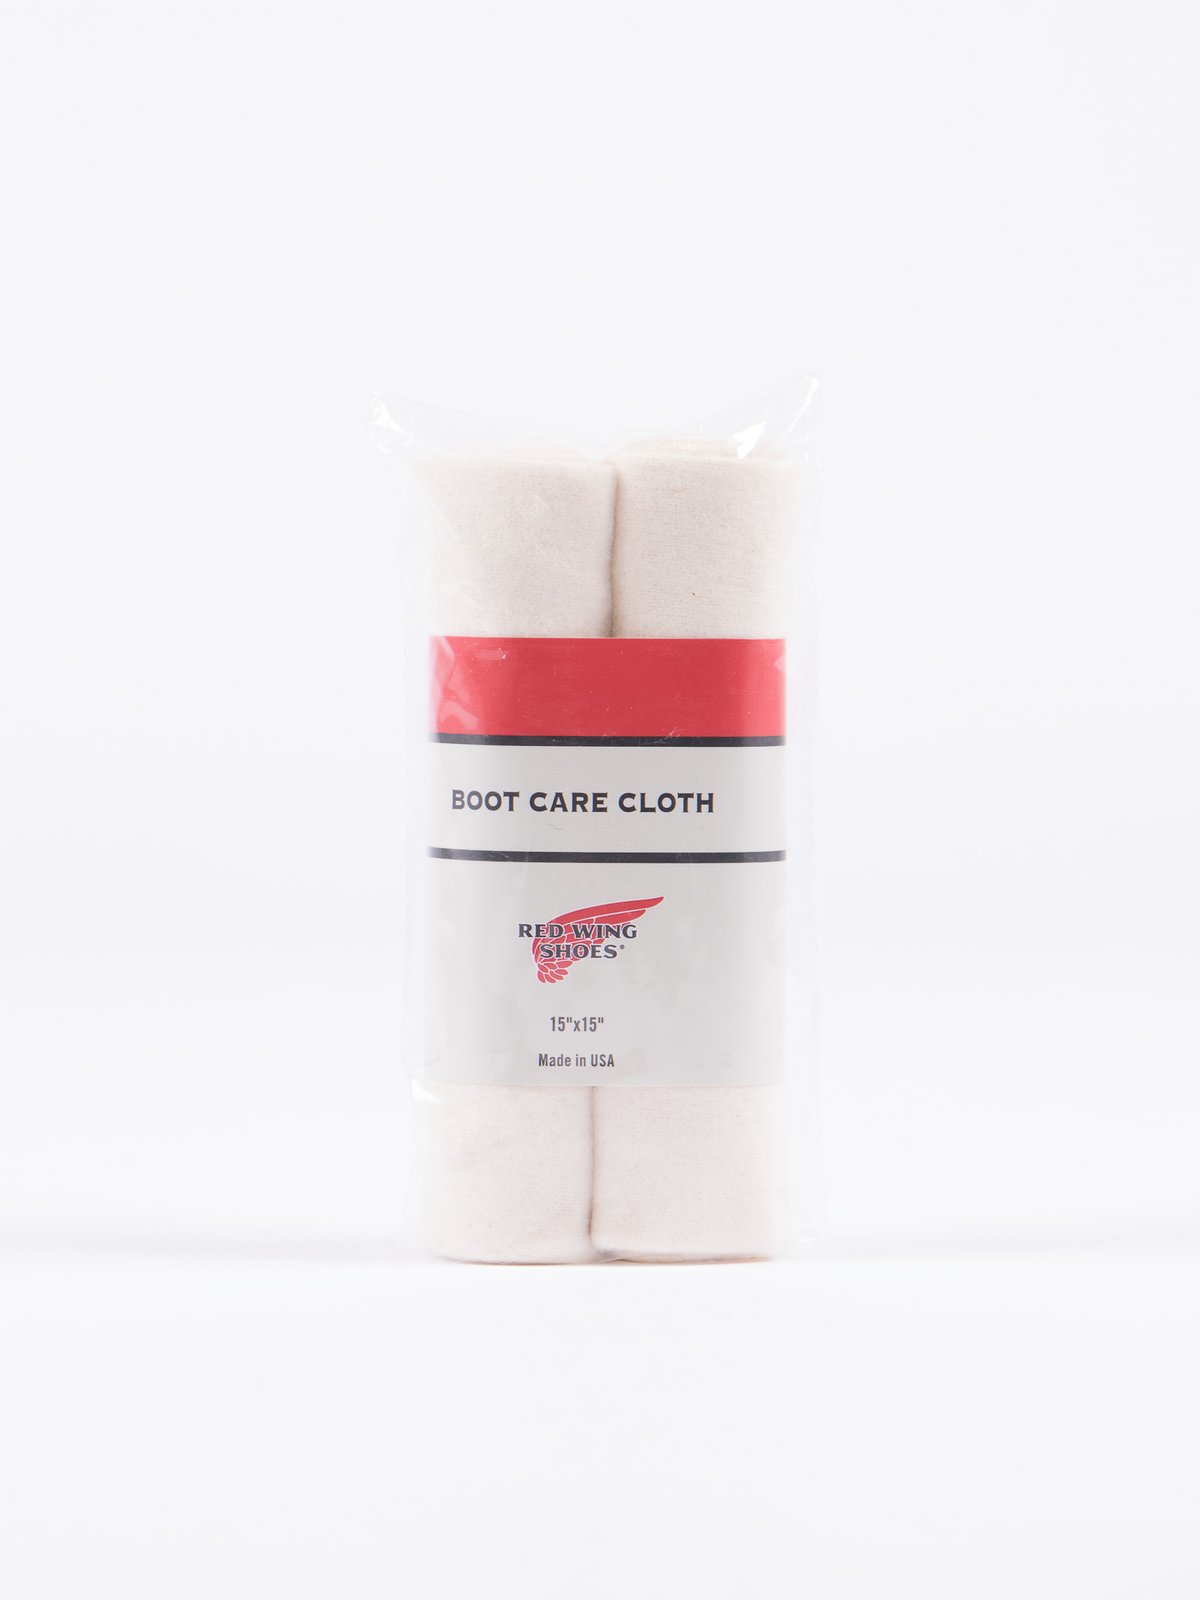 Boot Care Cloth - Image 1